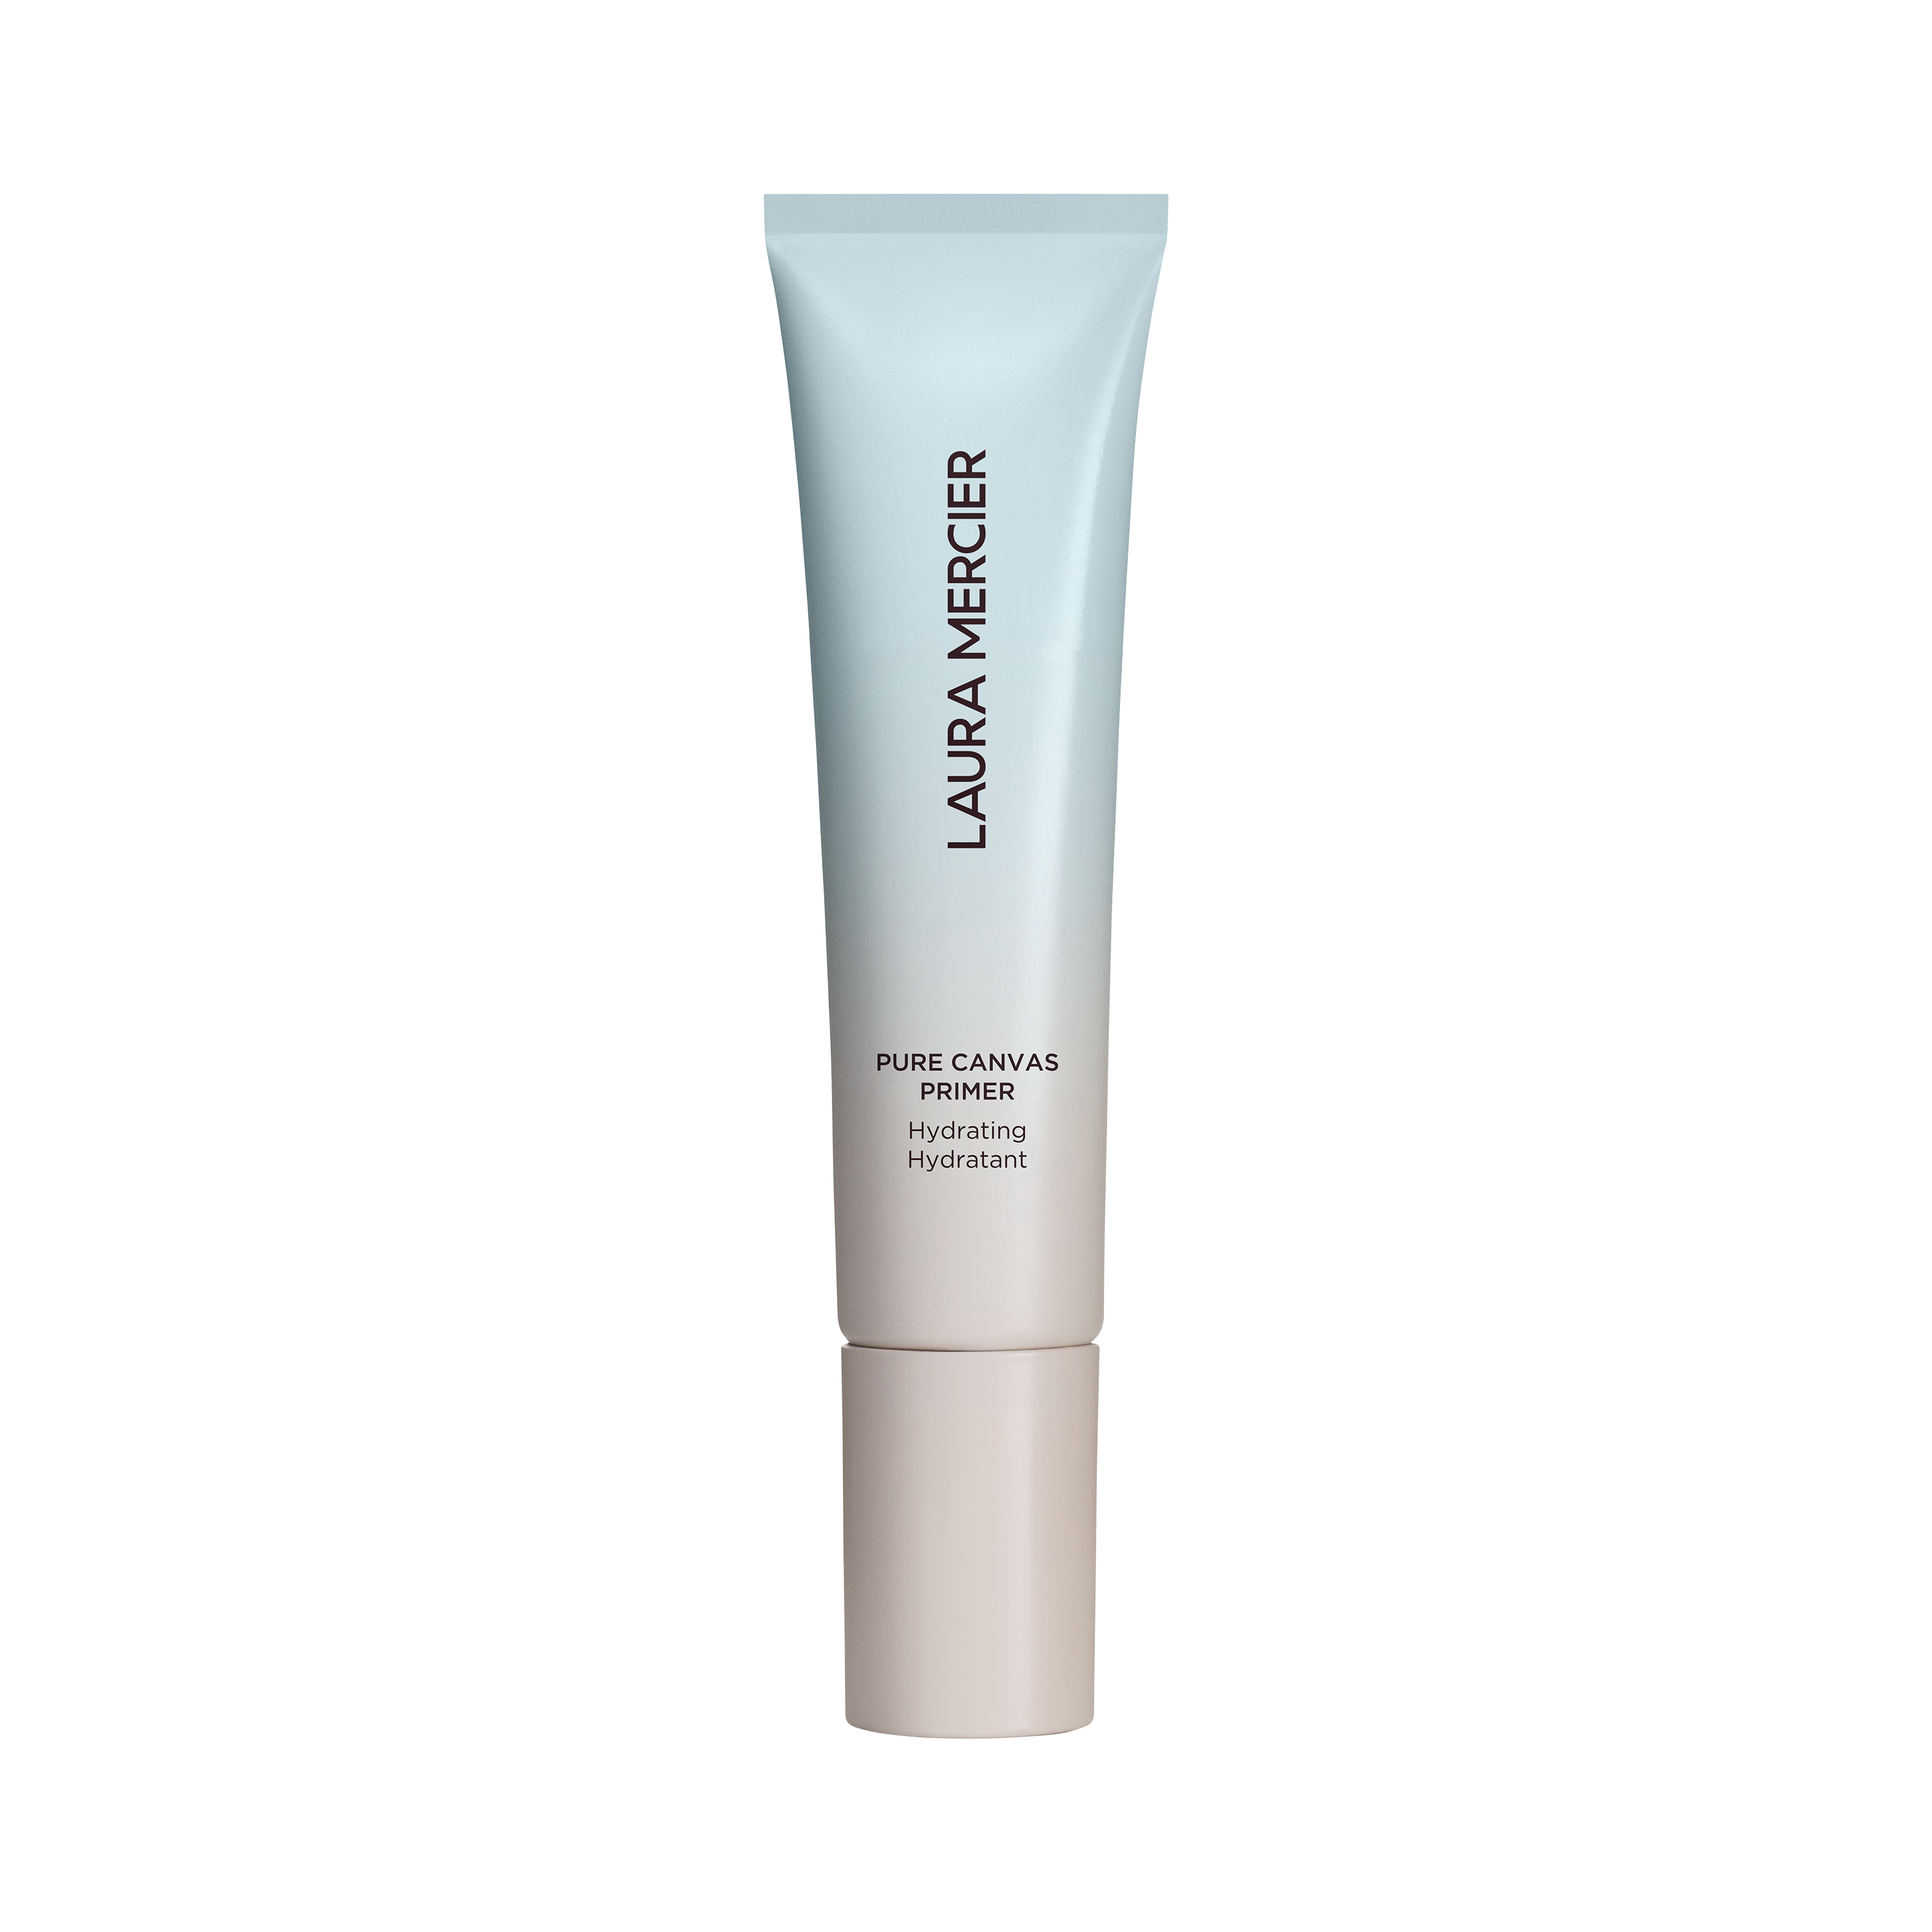 Pure Canvas Primer Hydrating View 1